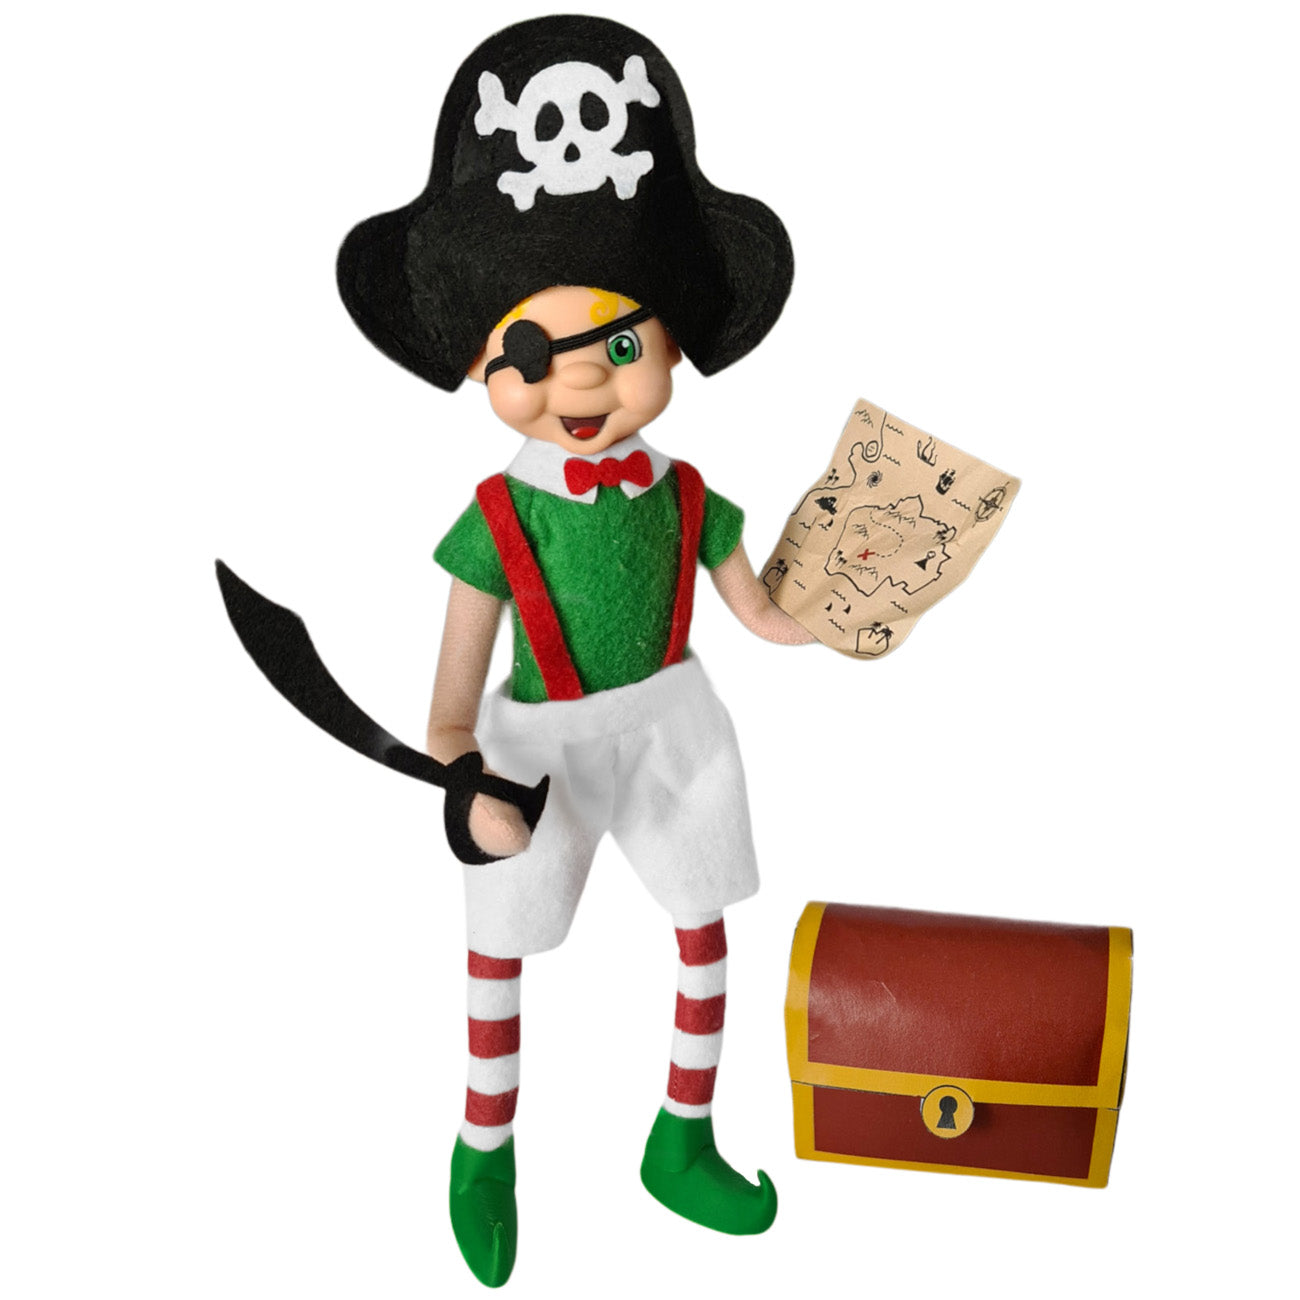 My Elf friends dressed in a pirate elf sized costume with a printable map and treasure chest 